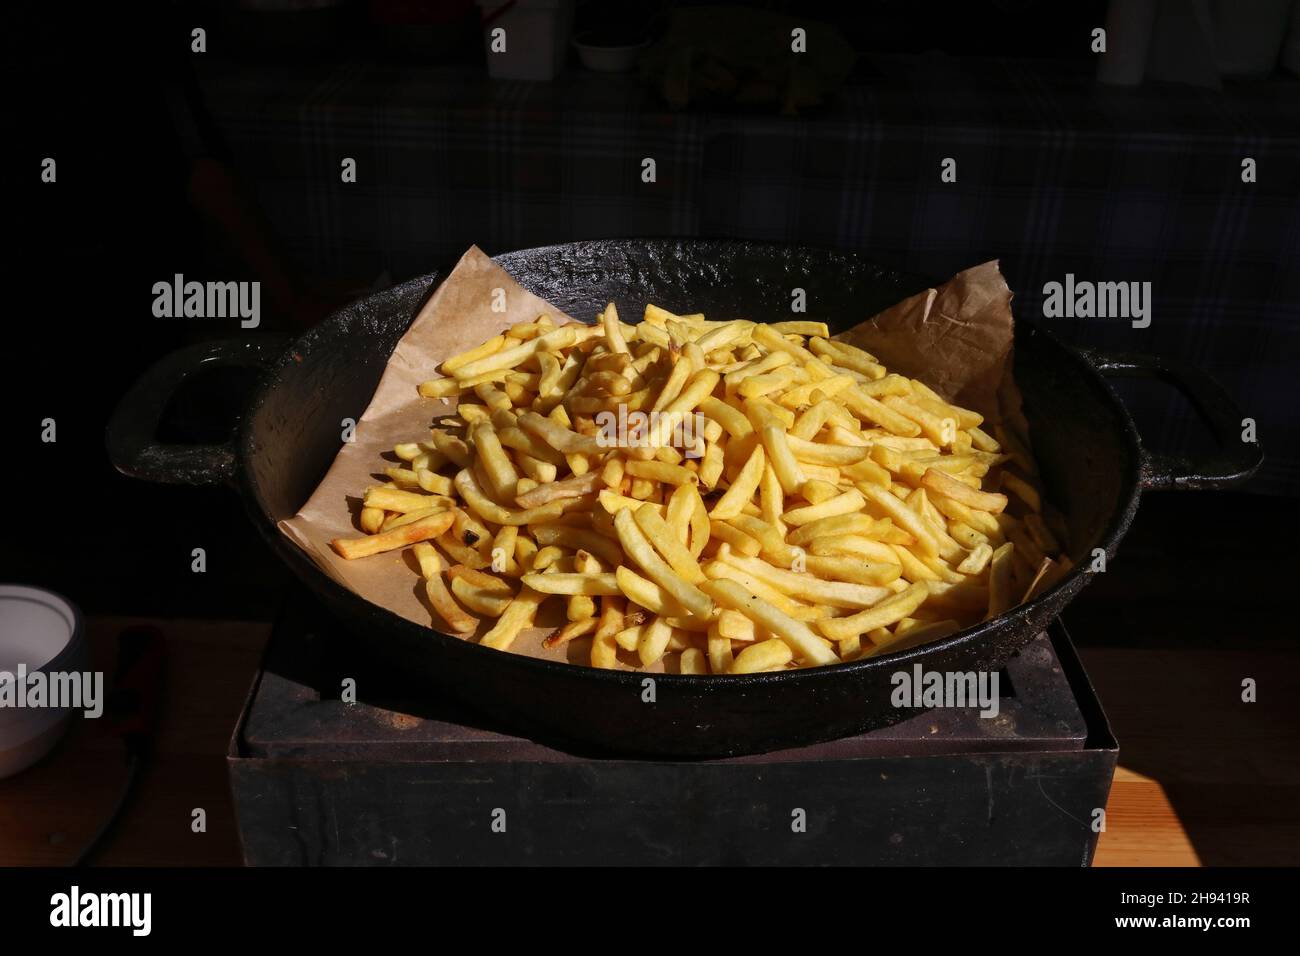 A pile of fried potatoes lies on a black  frying pan Stock Photo